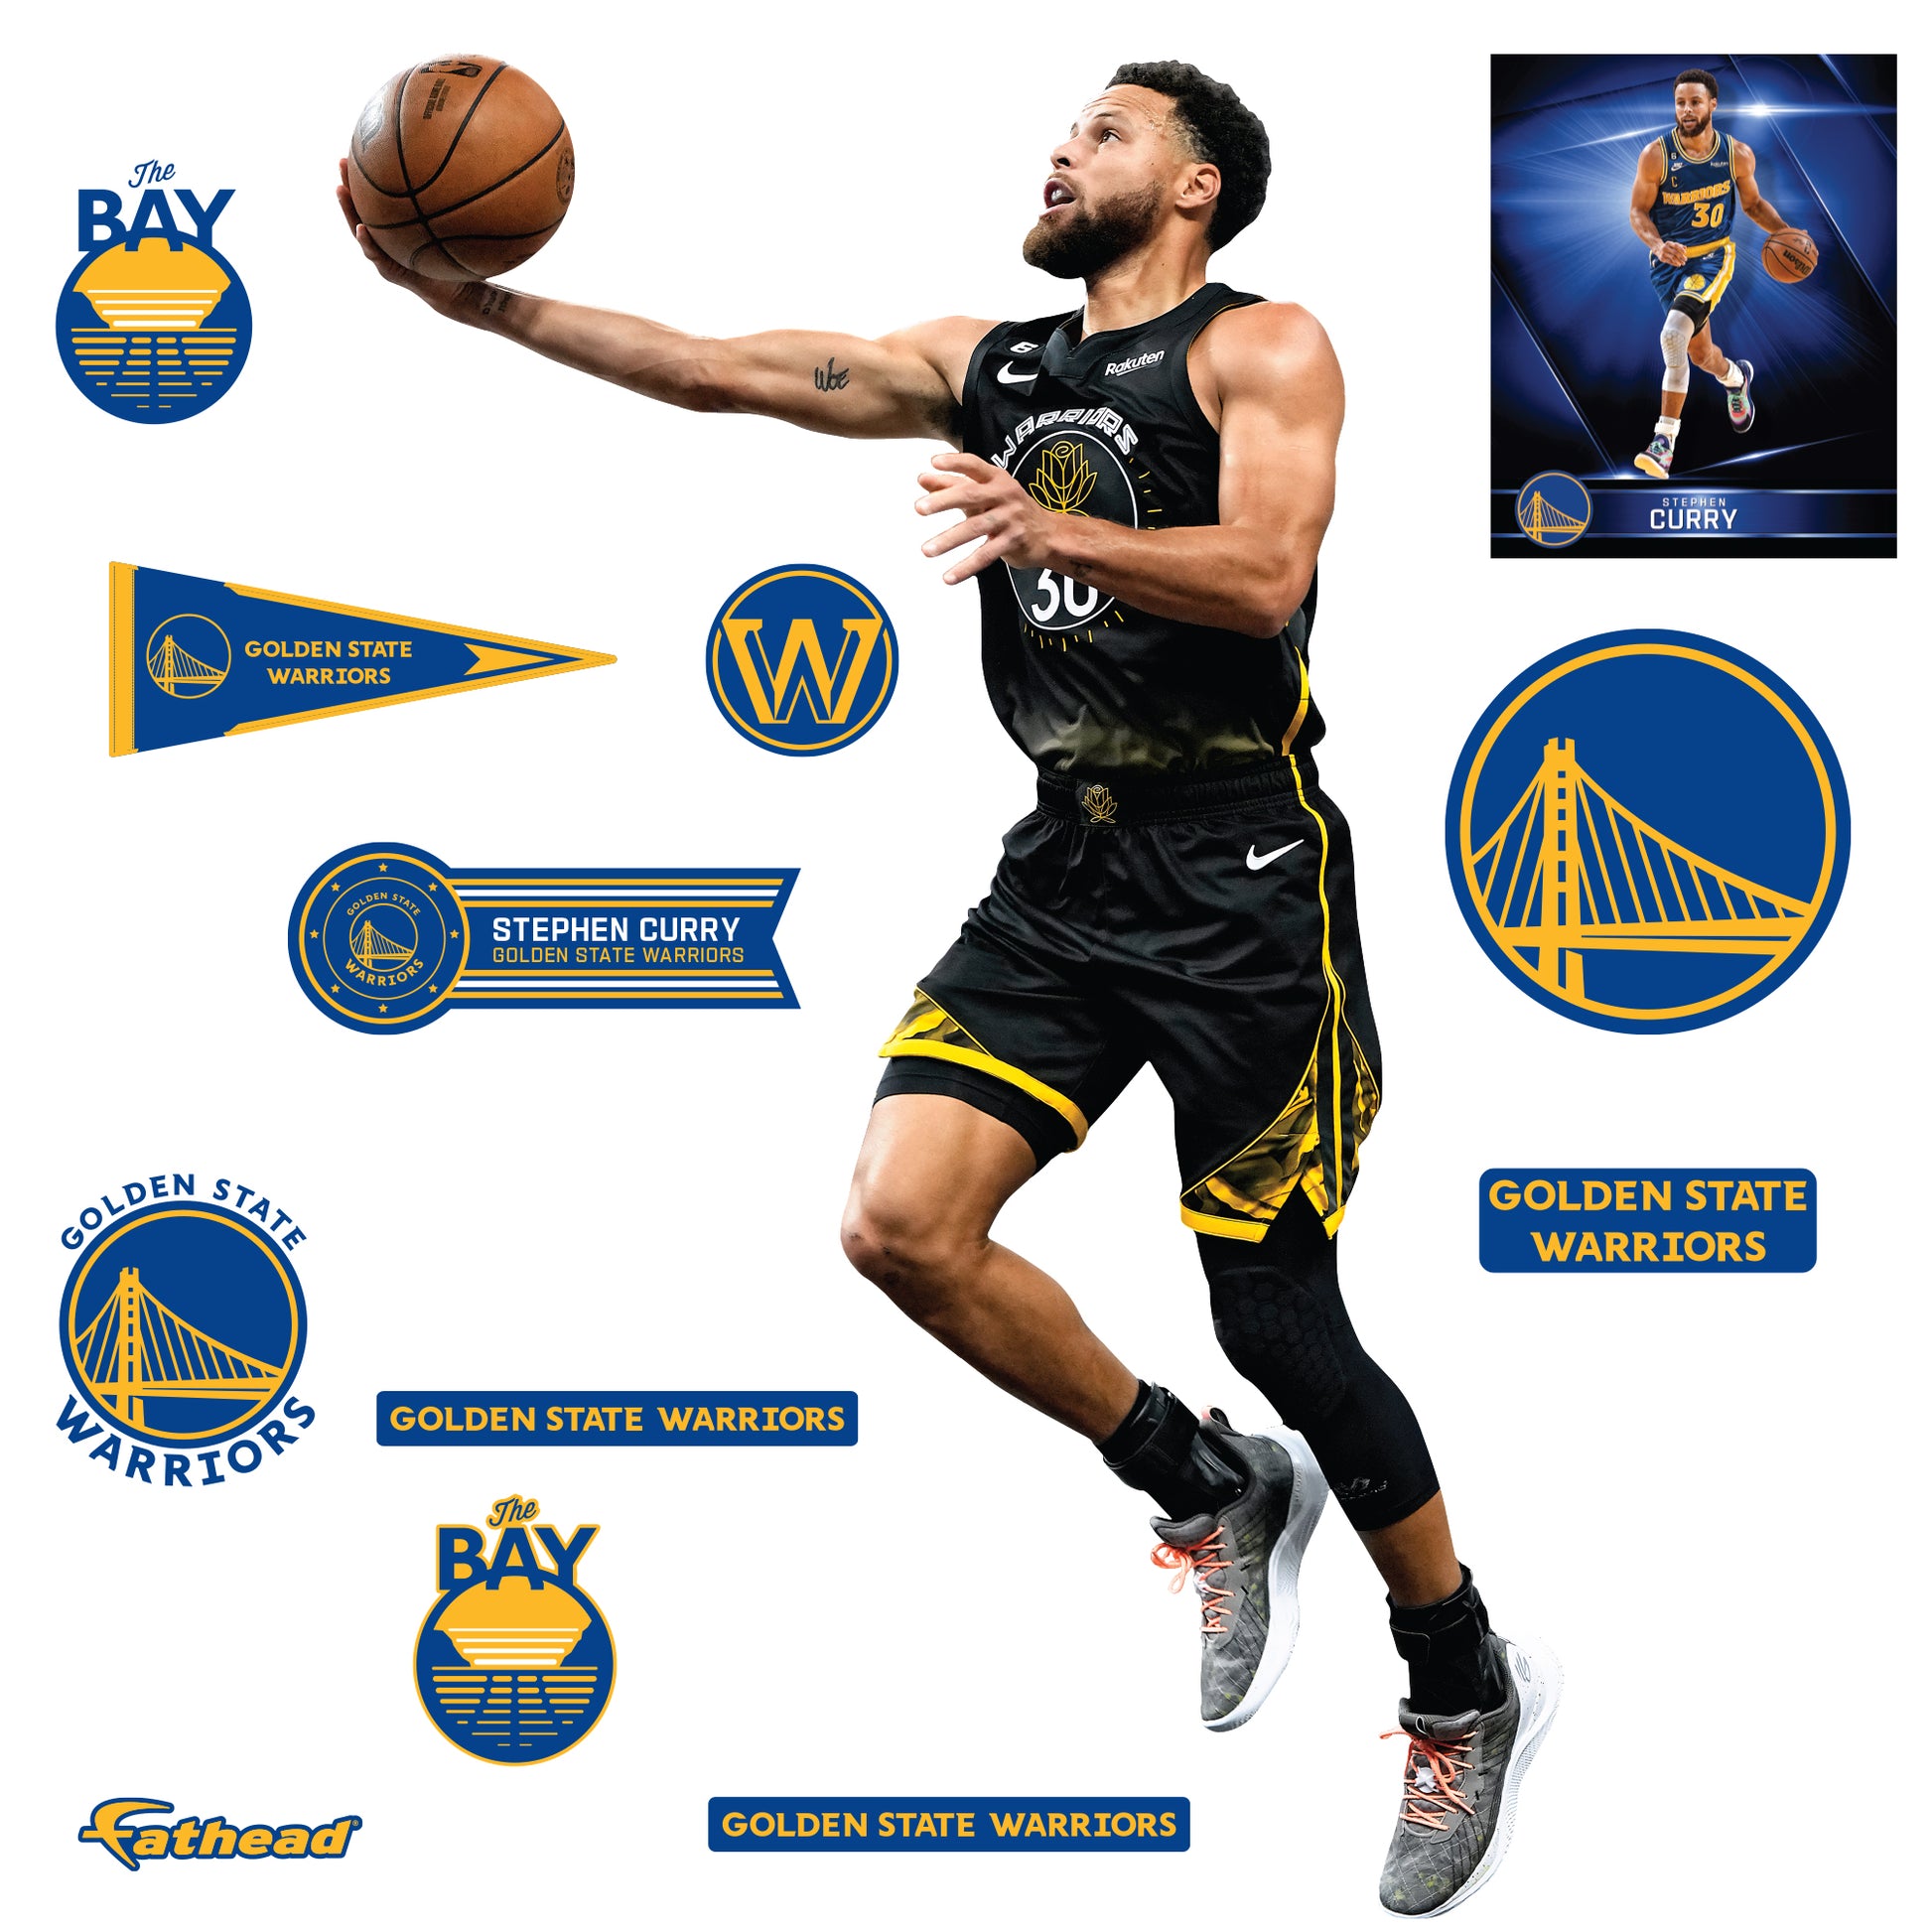 Golden State Warriors: Stephen Curry 2022 City Jersey - Officially